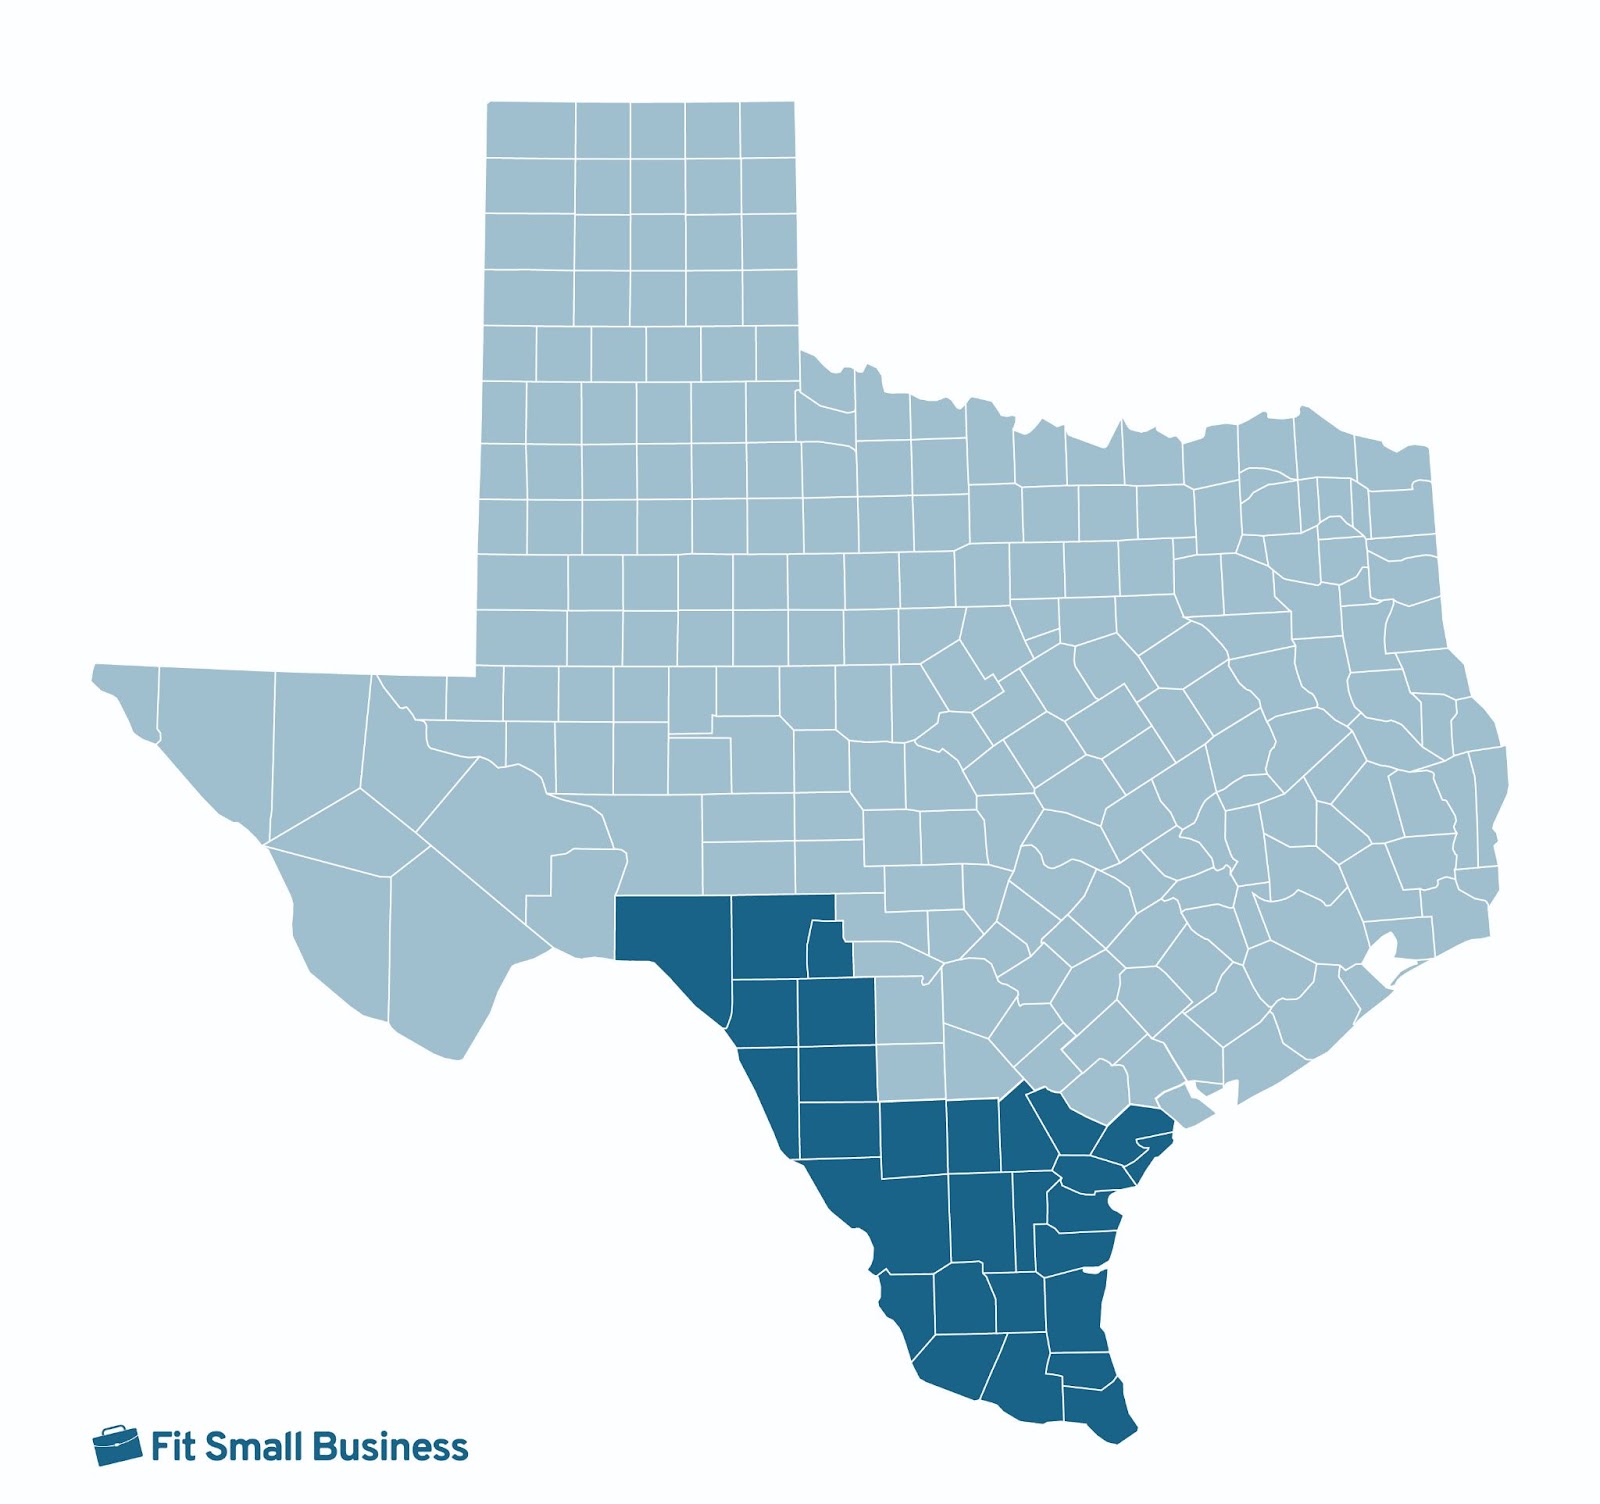 Other Business Banks in South Texas.